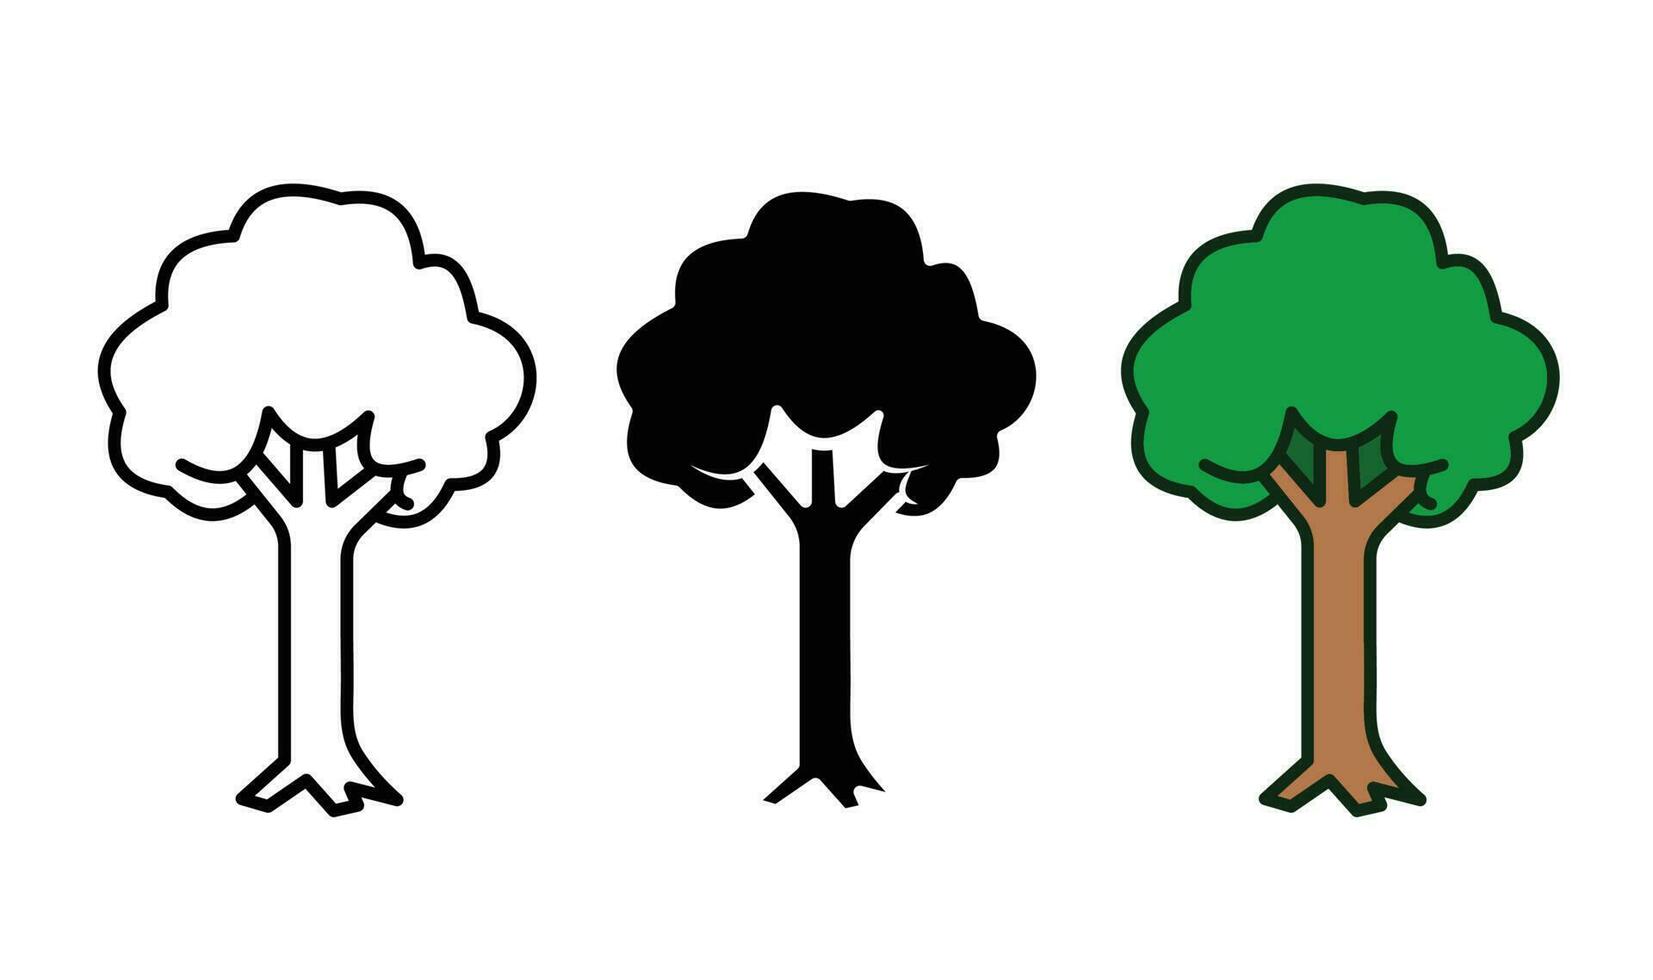 How to Draw a Simple Tree? | Step by Step Simple Tree Drawing for Kids